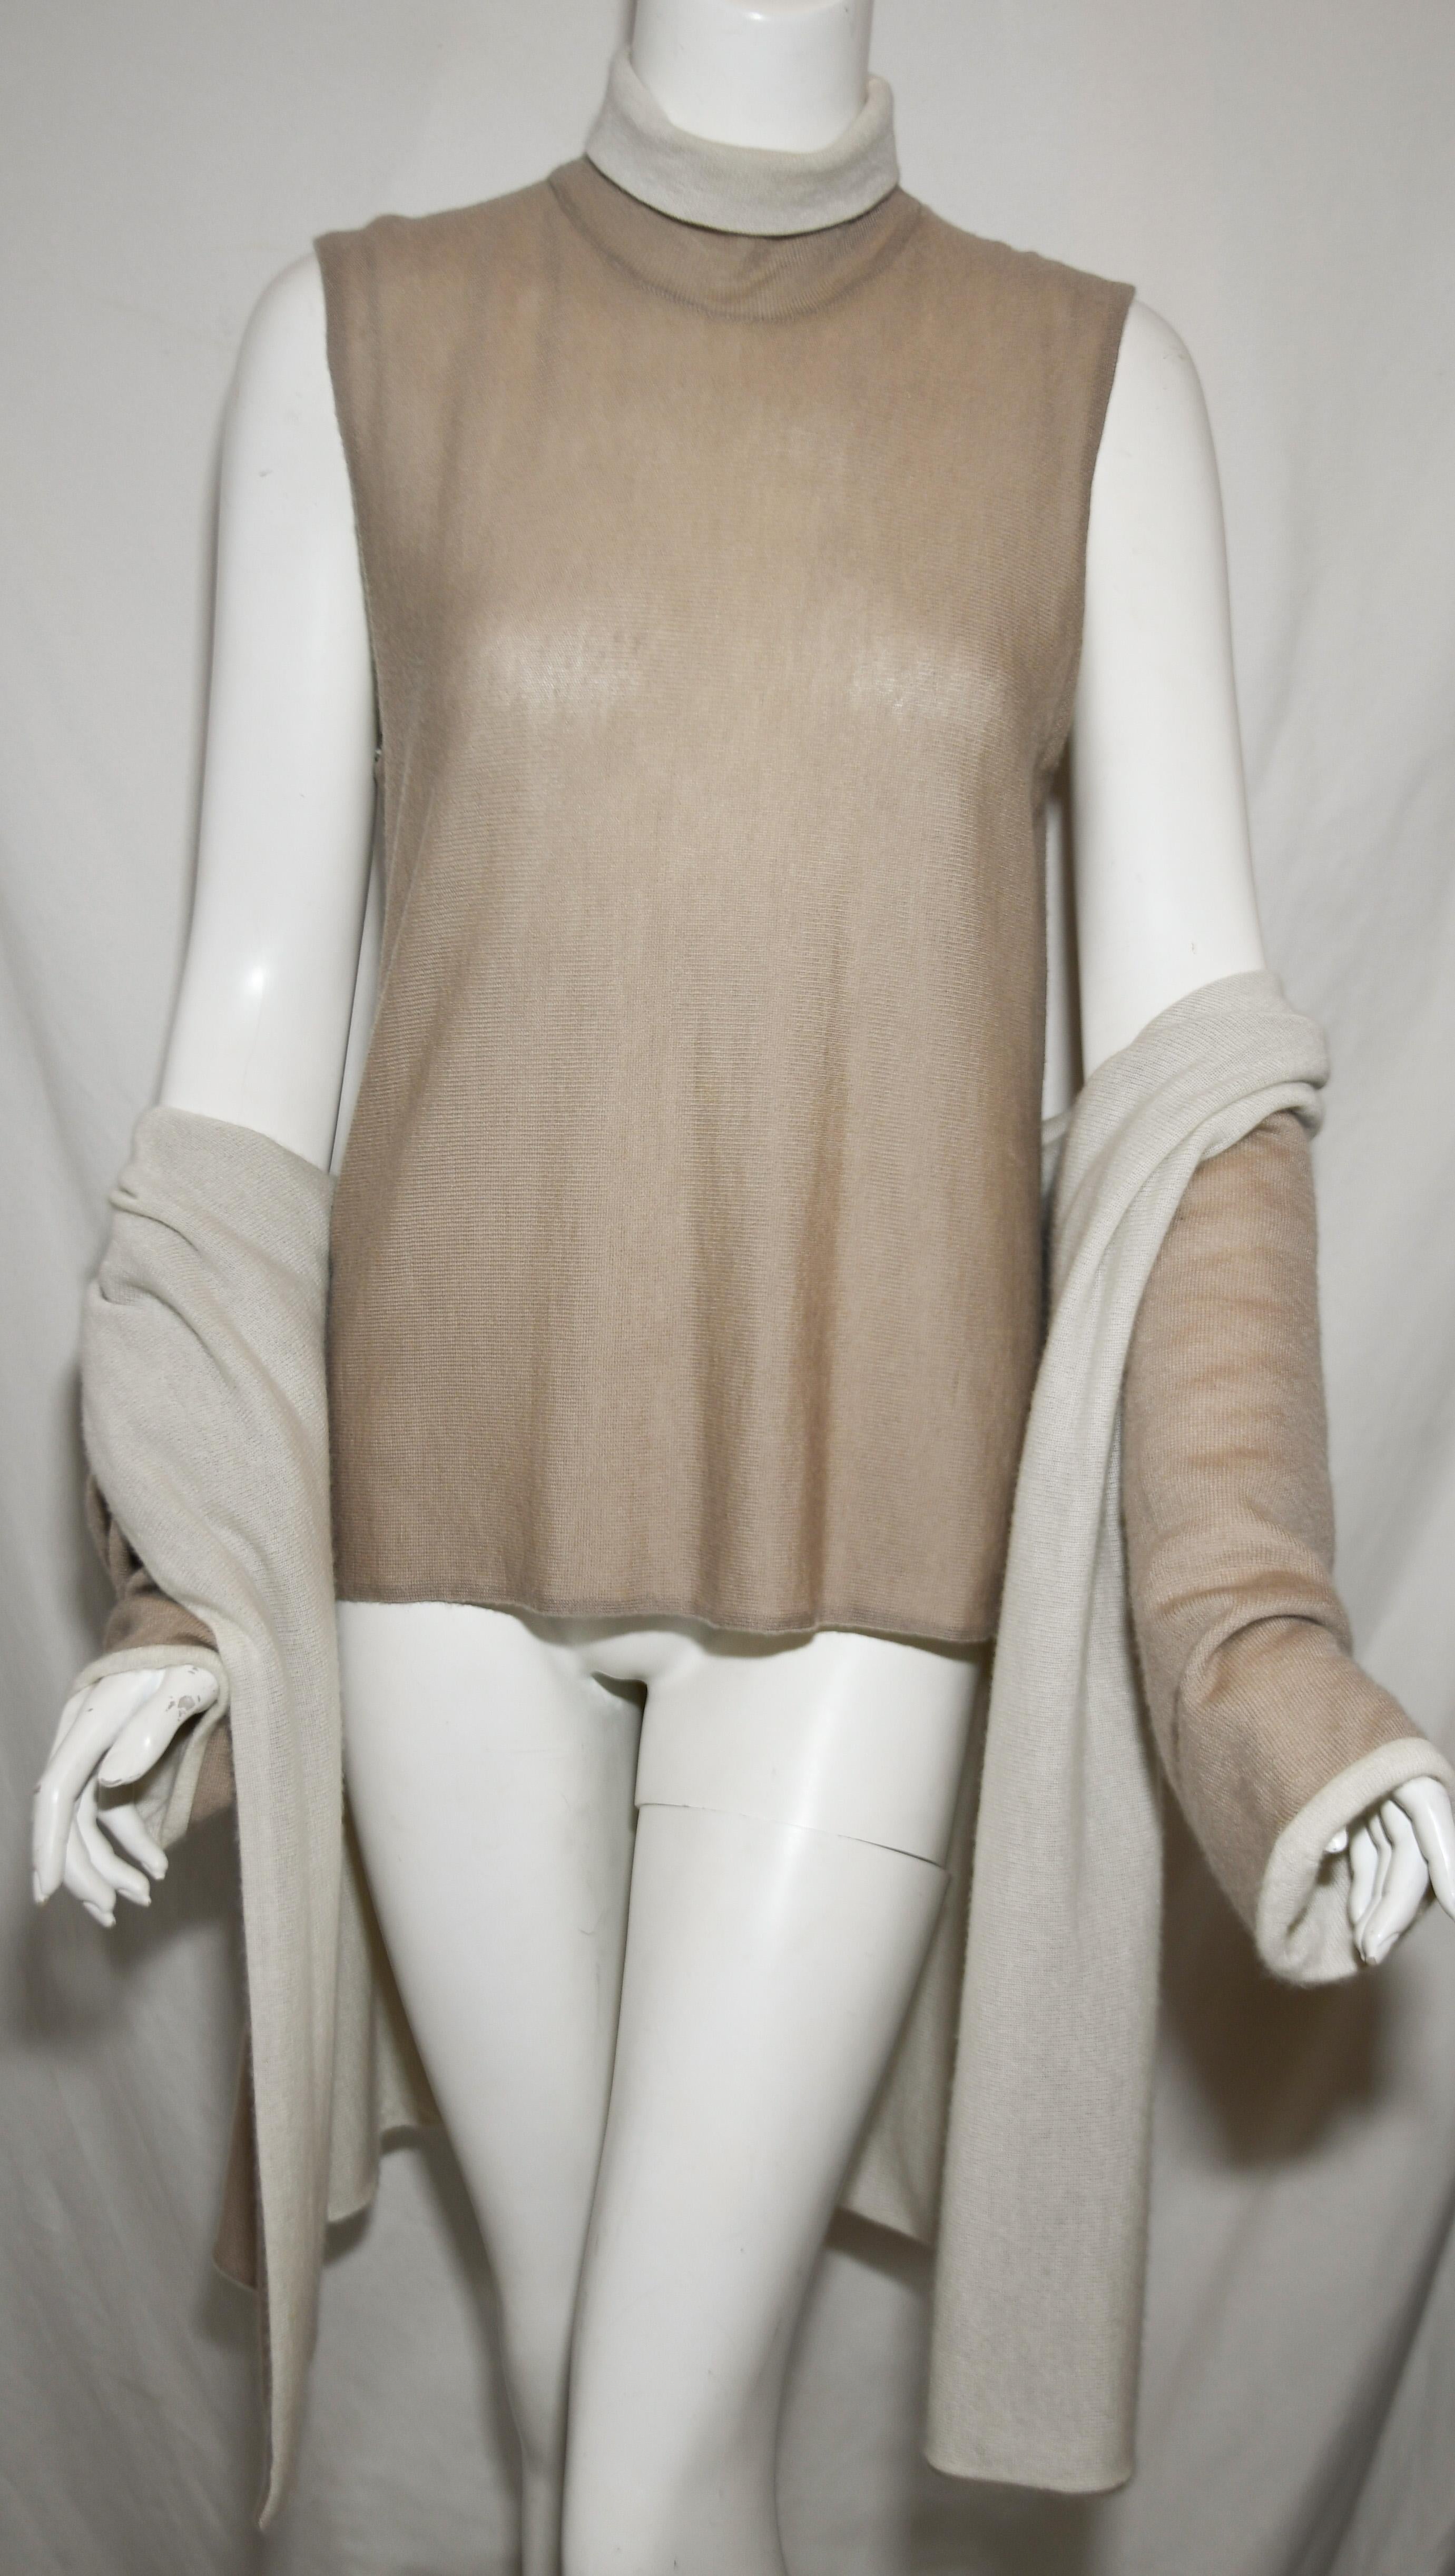 Chanel beige and ivory cashmere sweater set contains a cashmere shell with a mock turtle neck collar in contrasting color.  The jacket, also has a contrasting color of either beige or ivory.  This ensemble can be worn on either color if Hermes